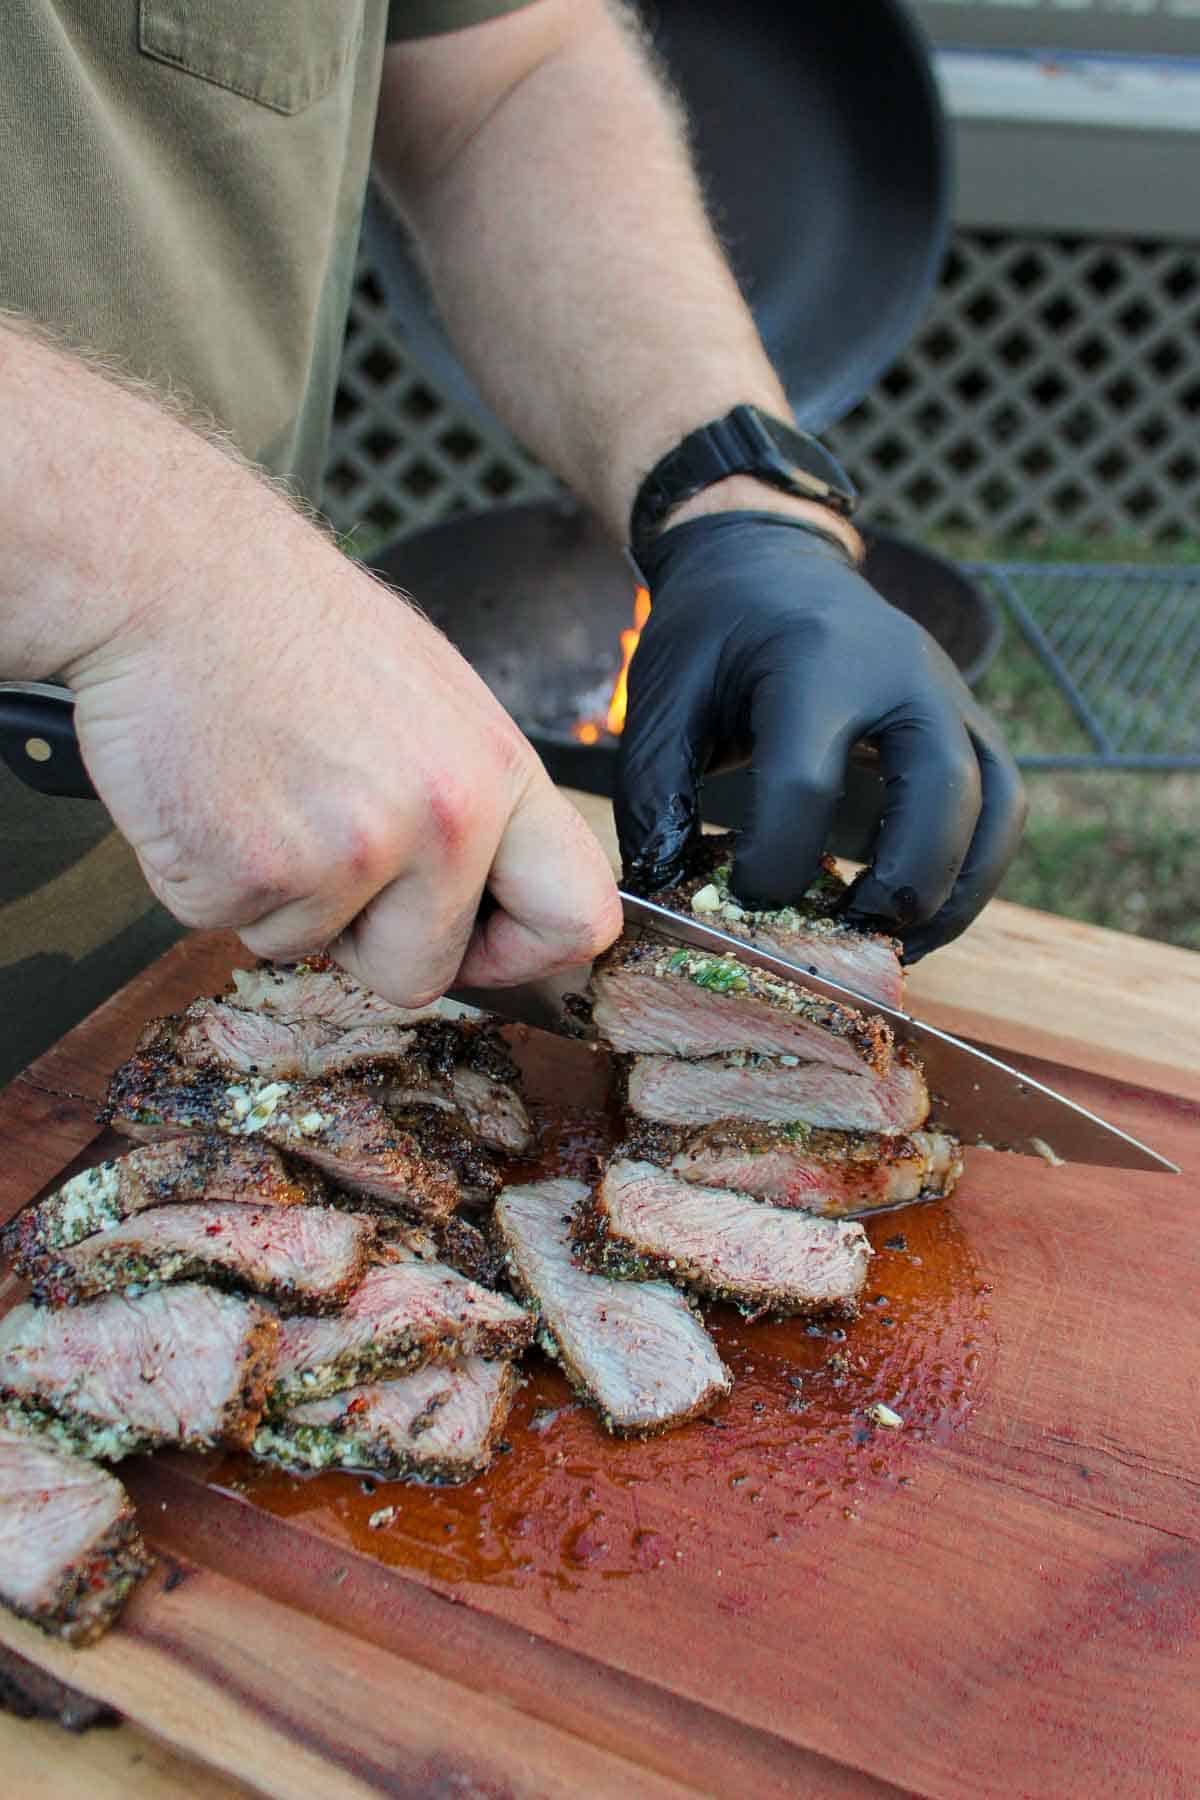 Slicing up the grilled steaks.